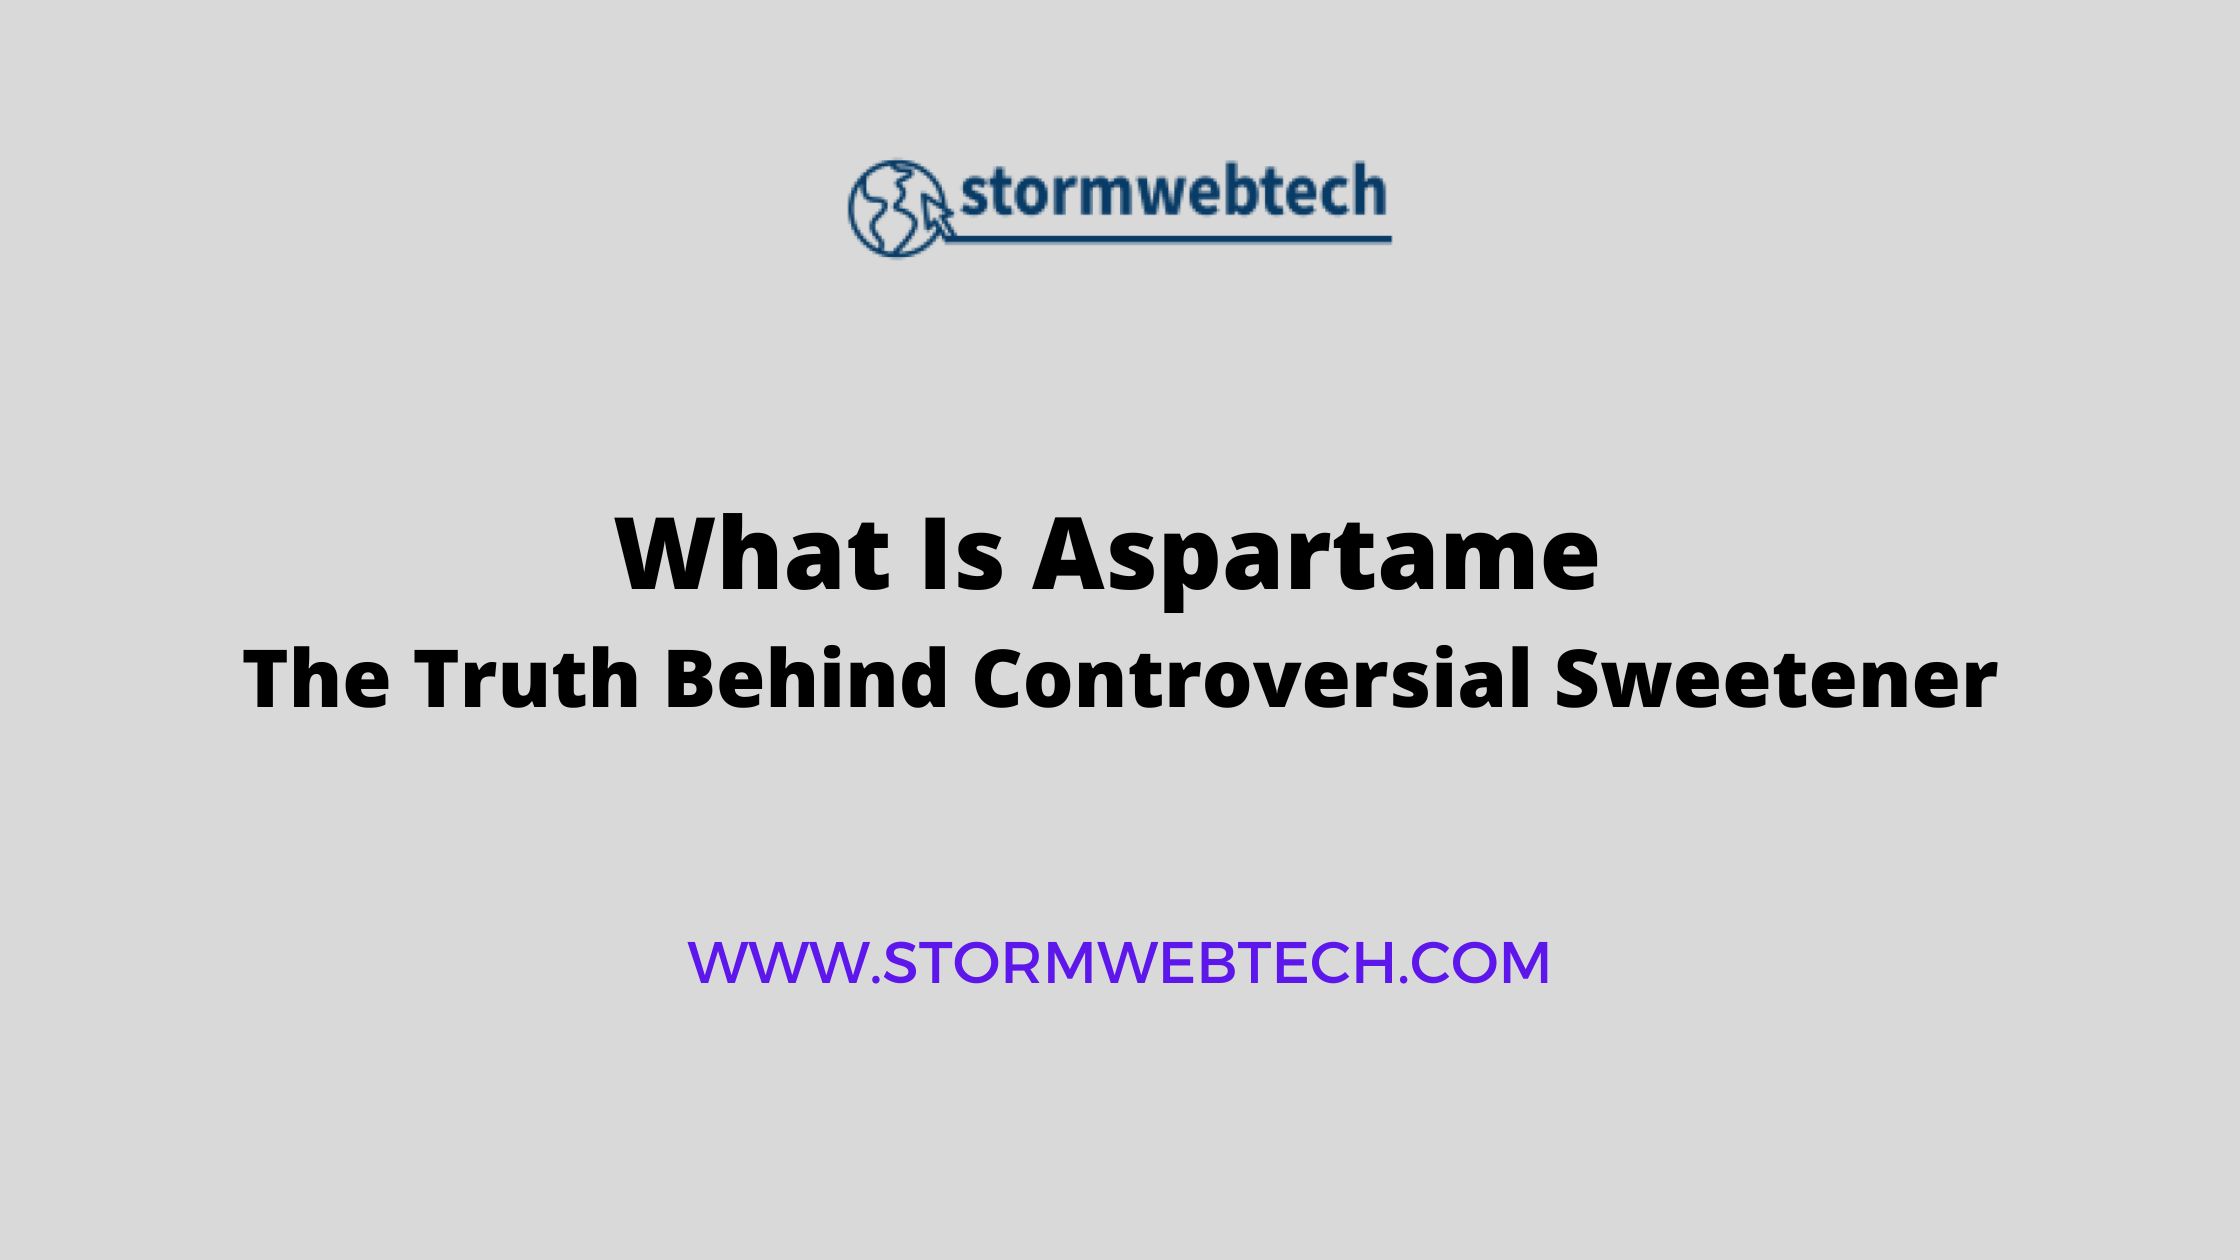 what is aspartame, aspartame is an artificial sweetener. composed of 2 amino acids, aspartic acid and phenylalanine